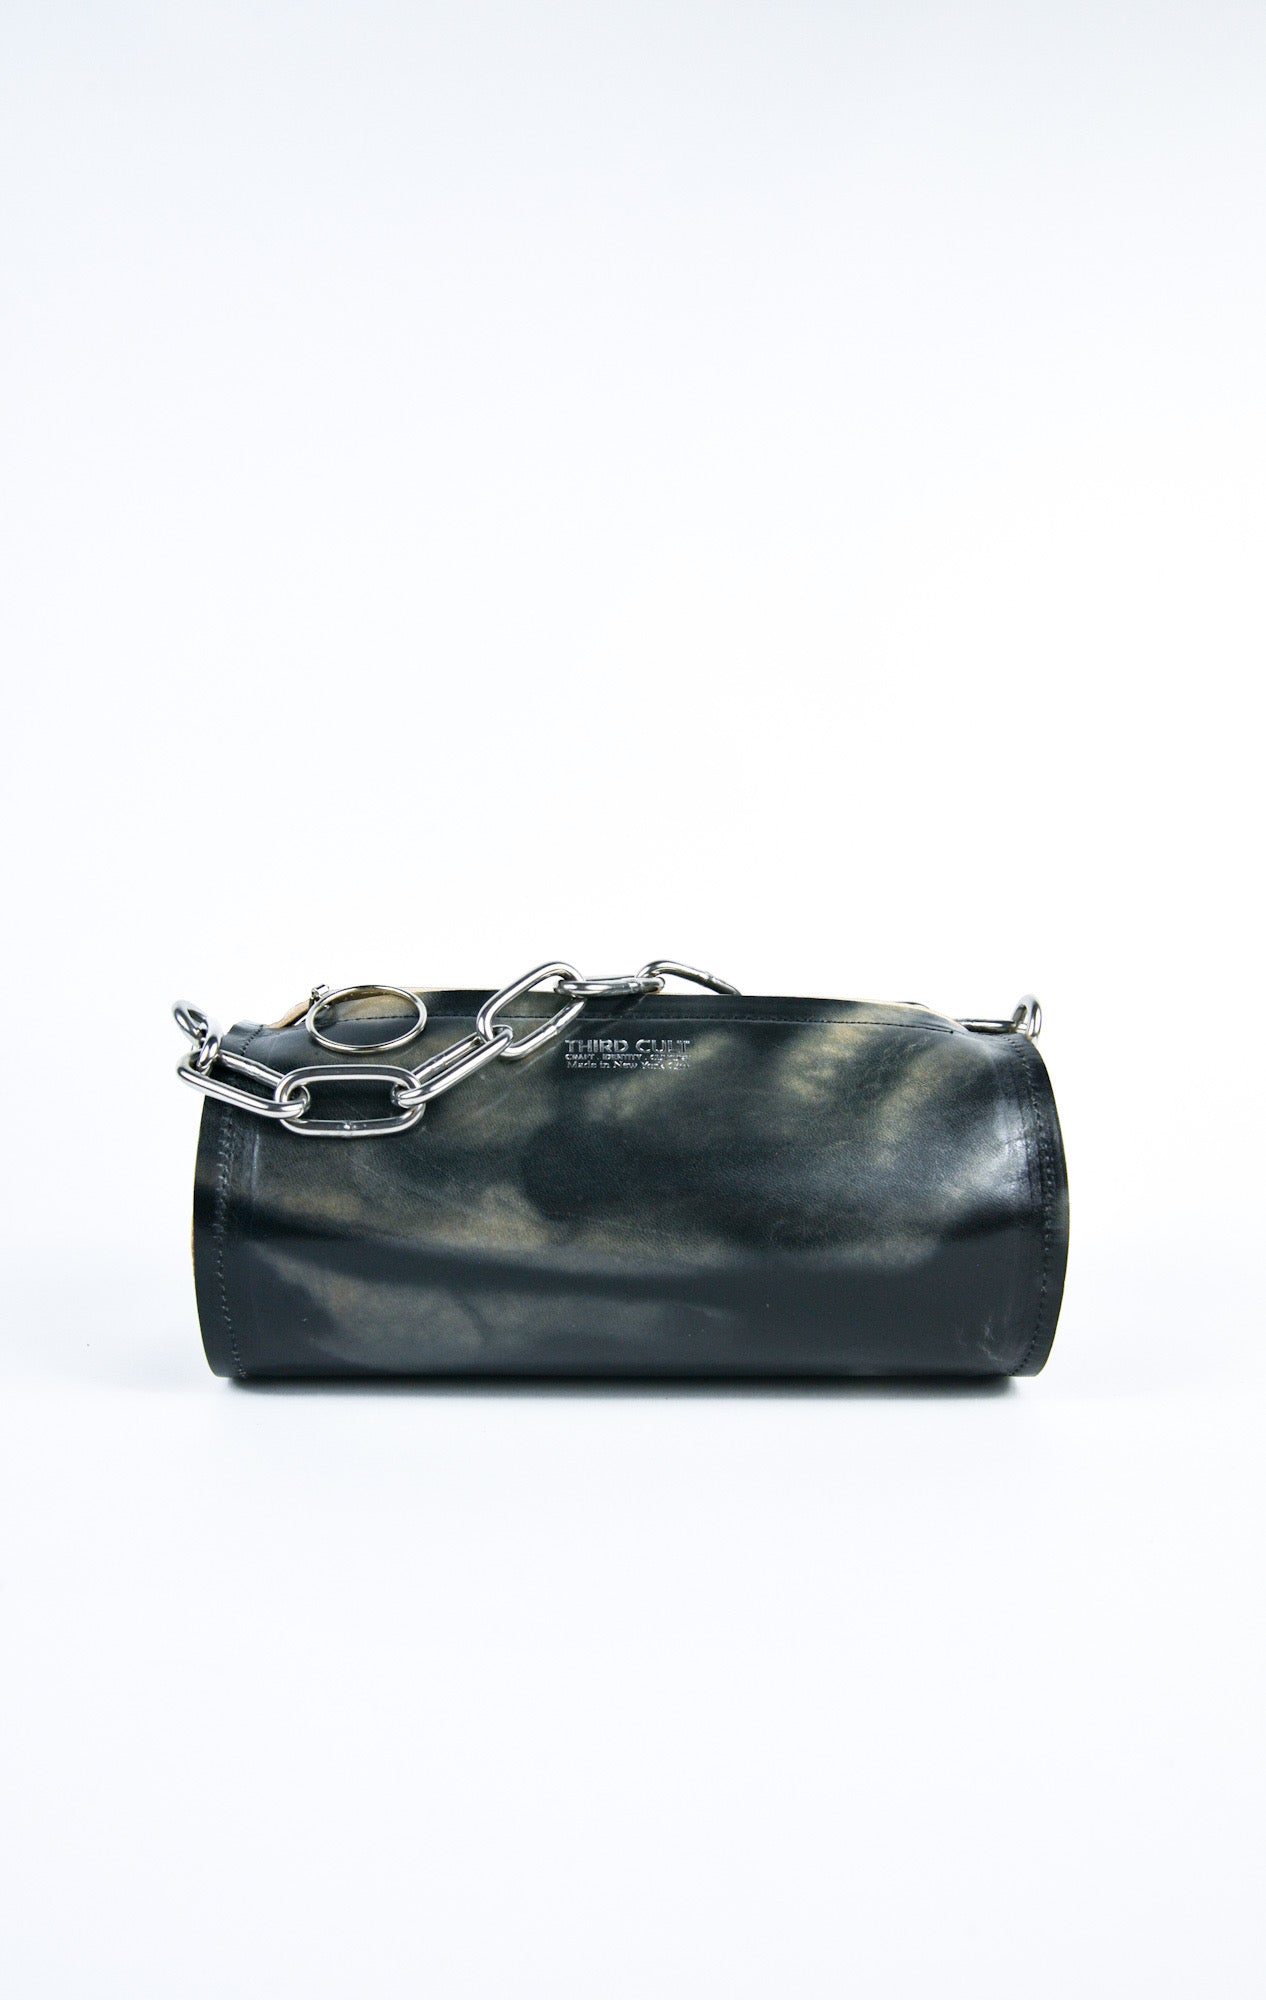 Black Leather Cylinder Mini Purse for Women, Small Barrel Bag Leather